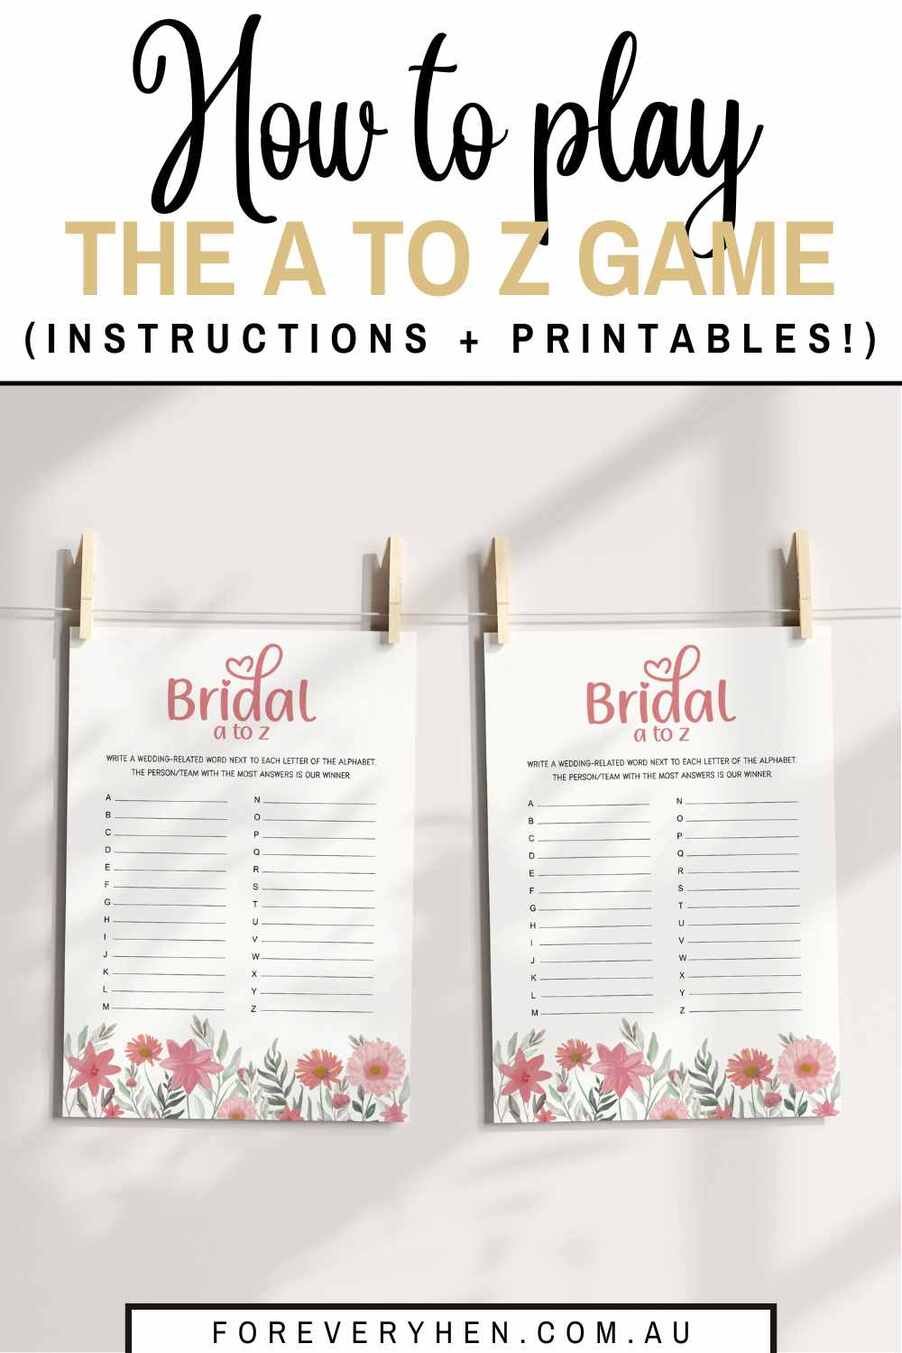 A person's hand holding a 'bridal a to z' game card up. There are spring flowers and trees in the background. Text overlay: How to play the a to z game (instructions + printables!)